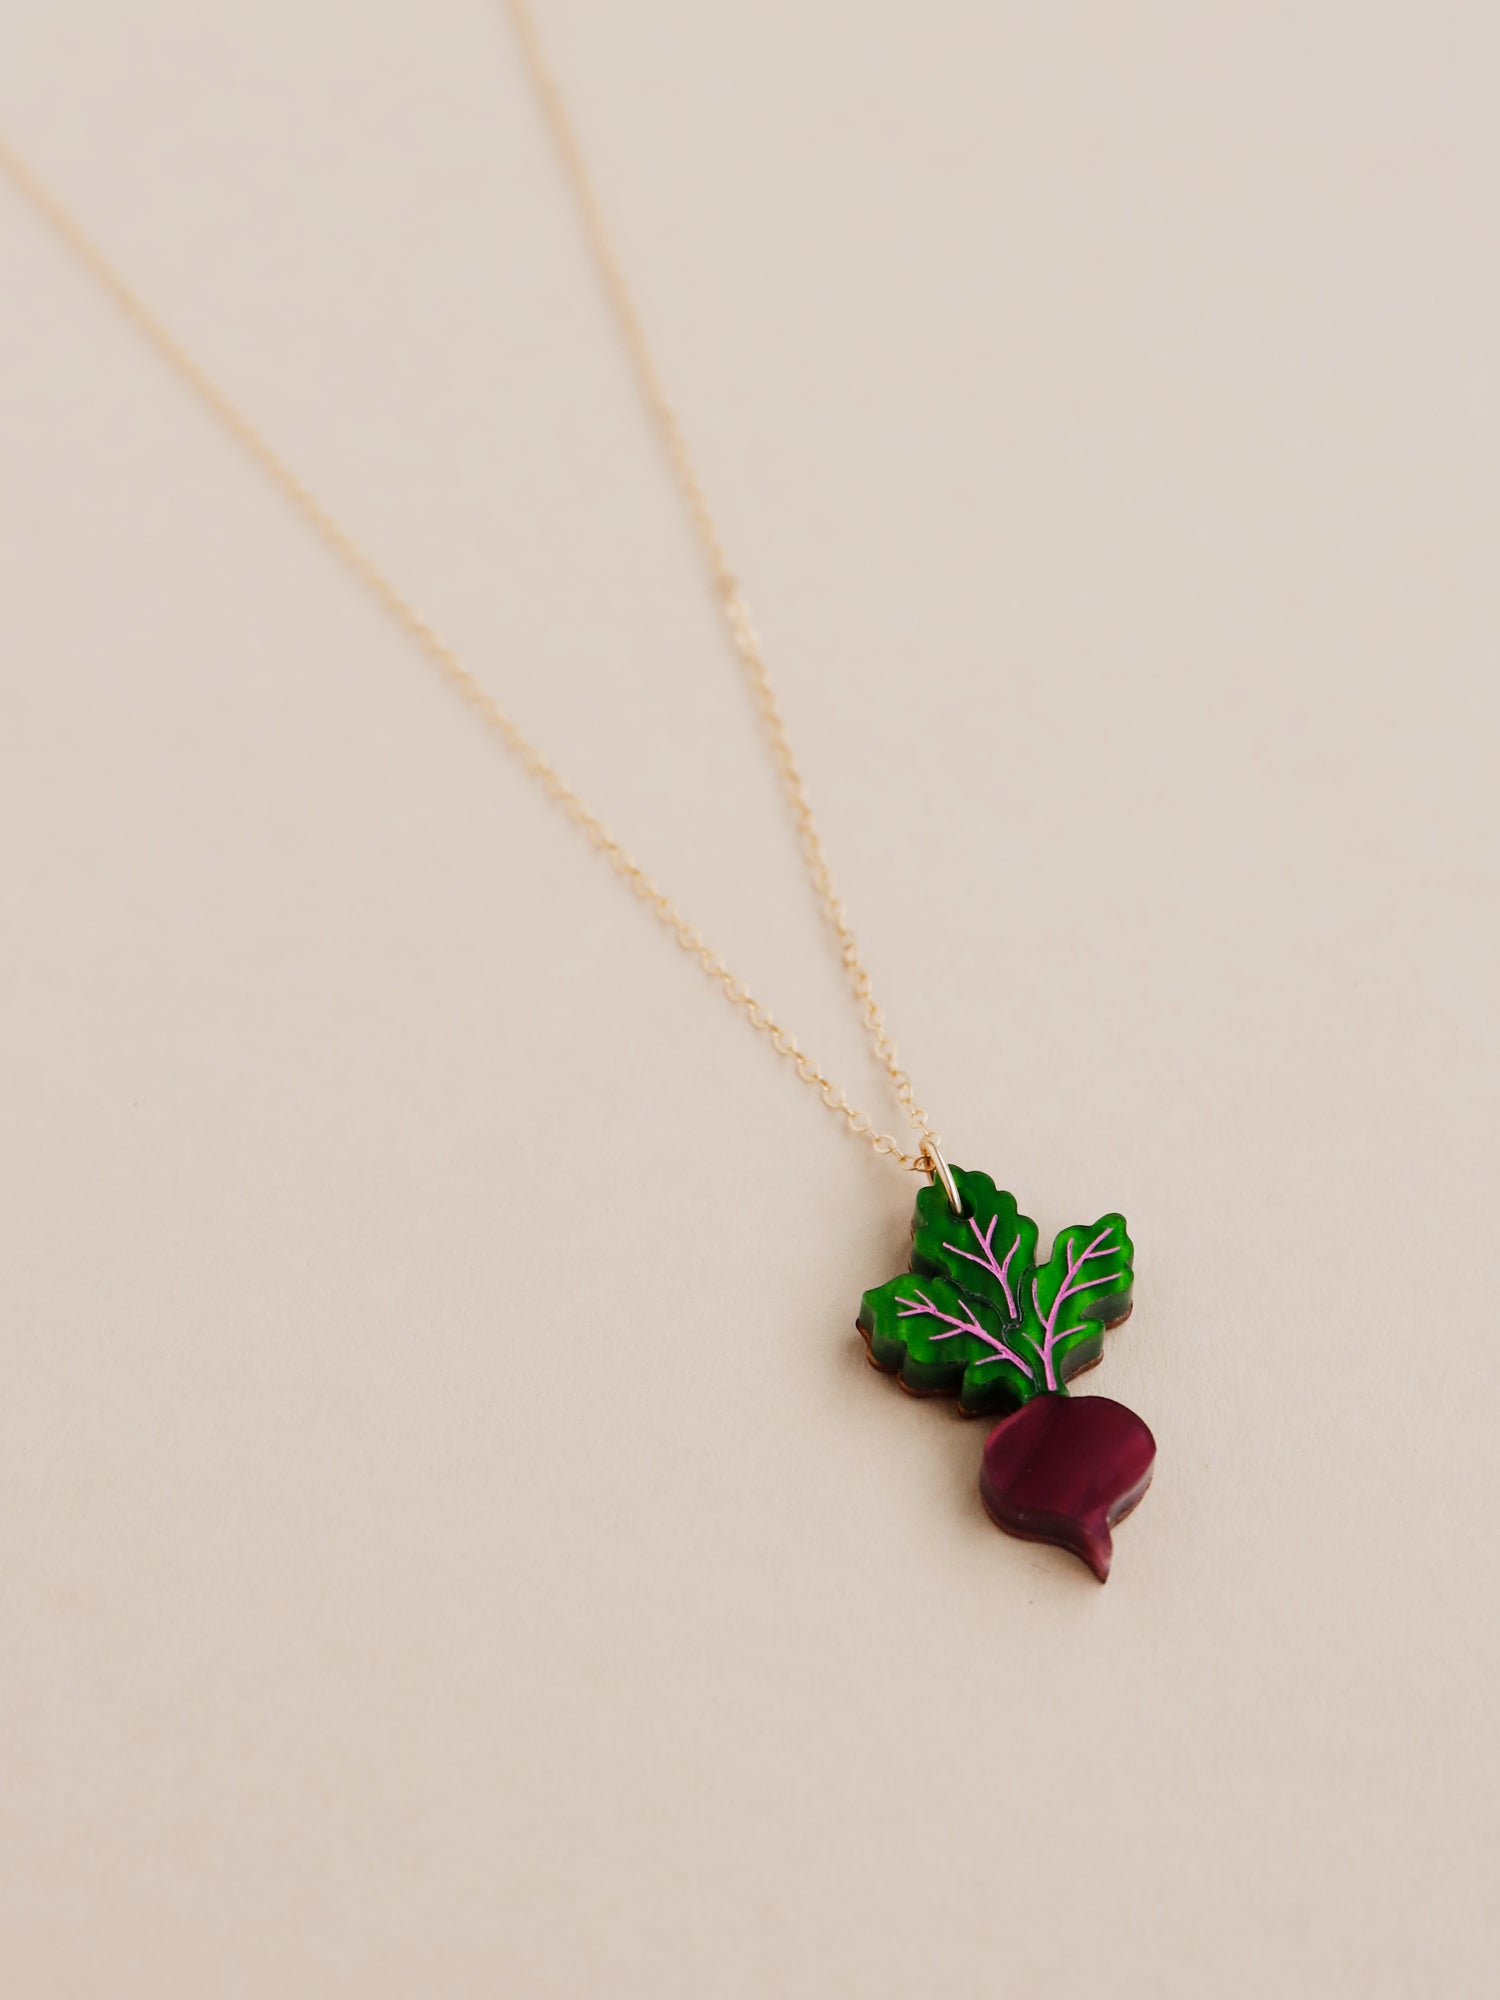 Purple and green acrylic mini beetroot pendant necklace with optional gold-filled chain. Handmade in London by Wolf & Moon.